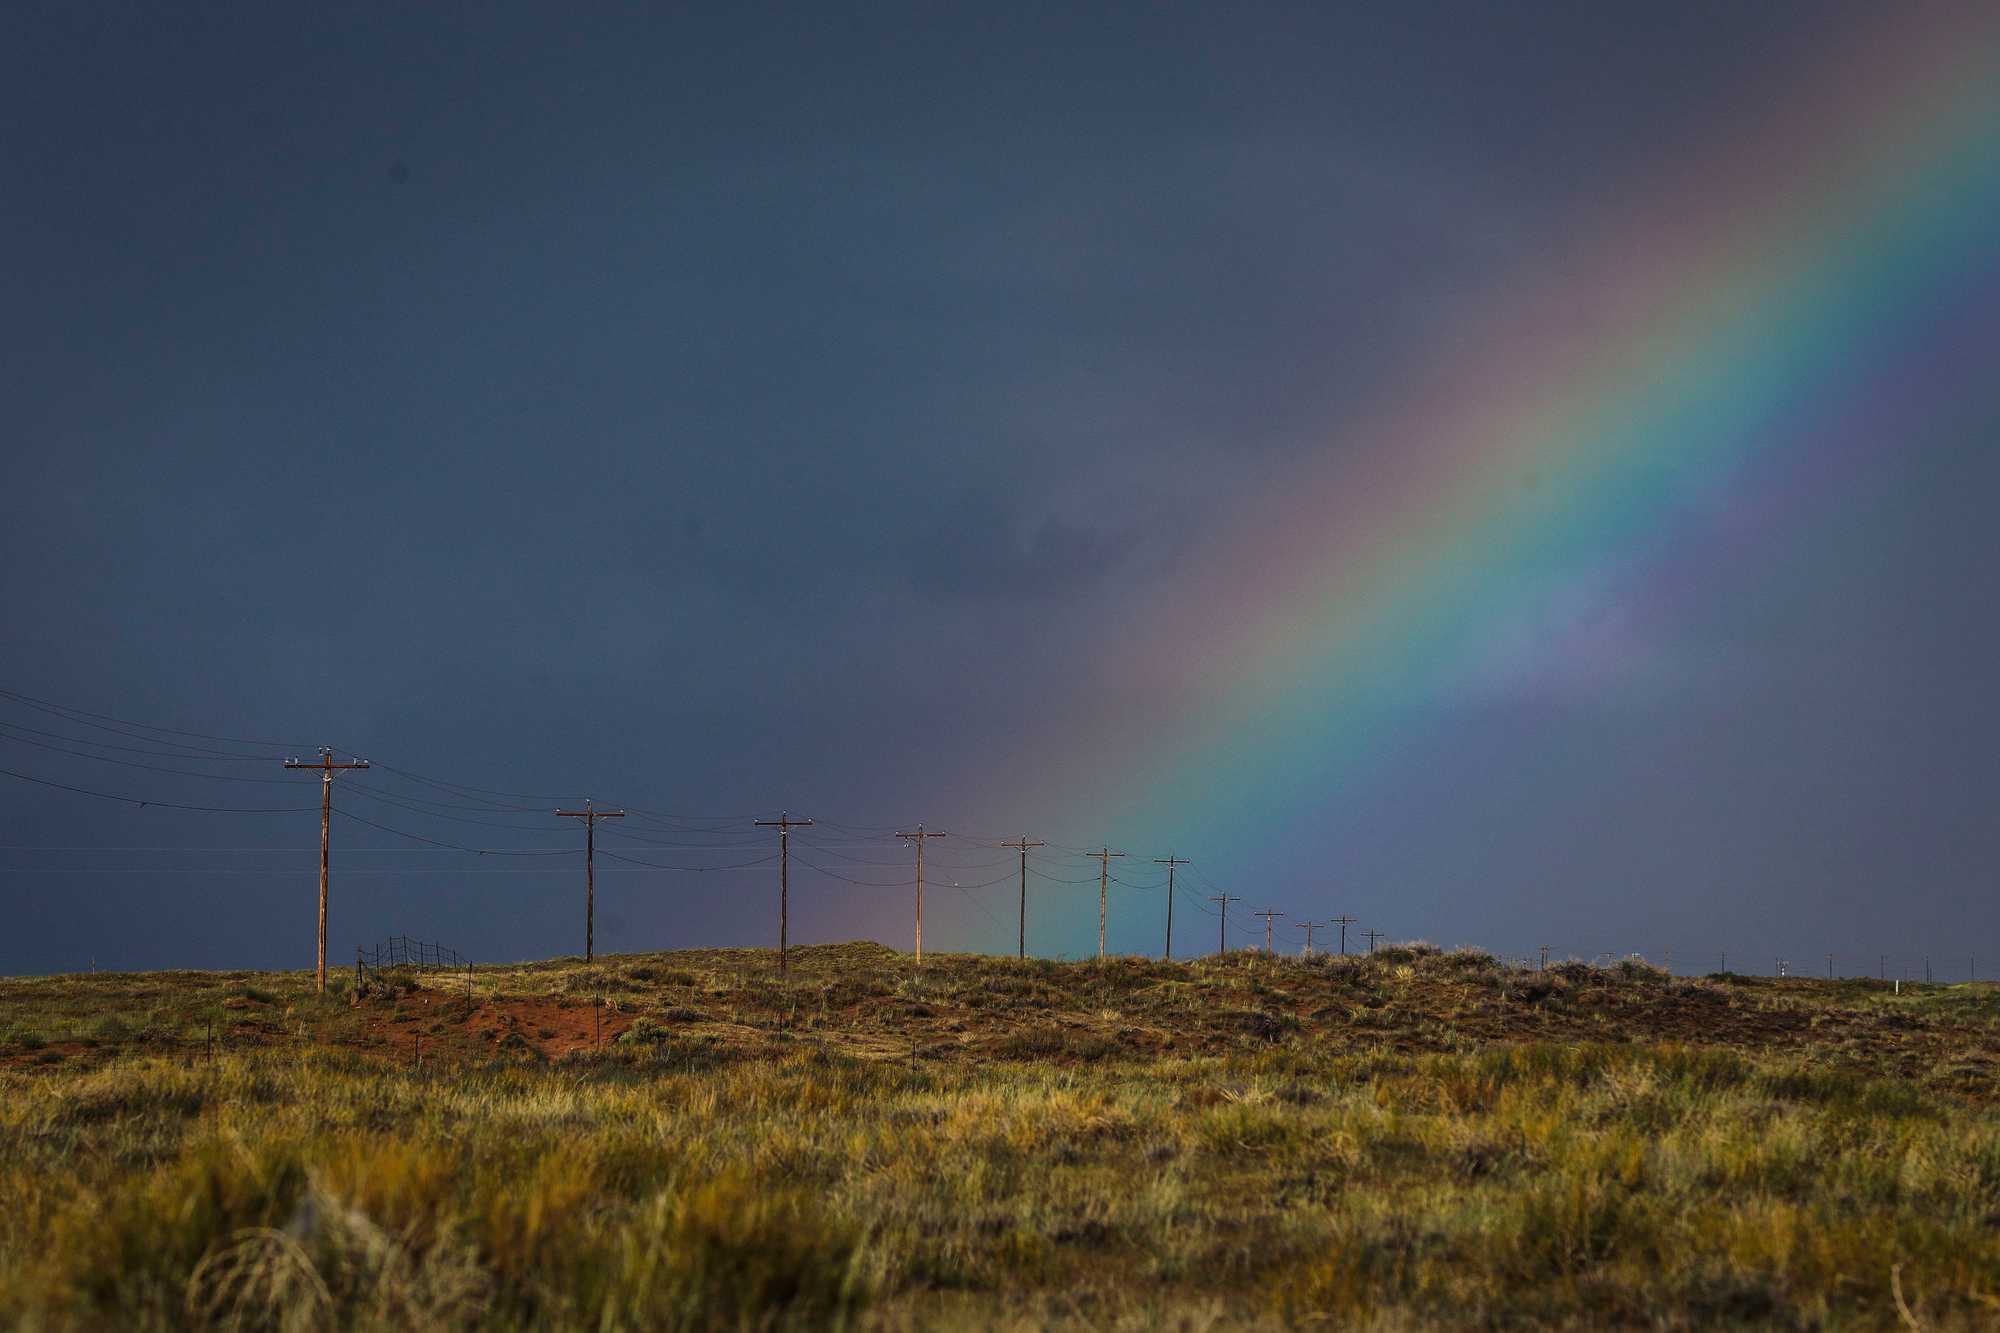  A rainbow stretched to the ground after a storm in New Mexico. 